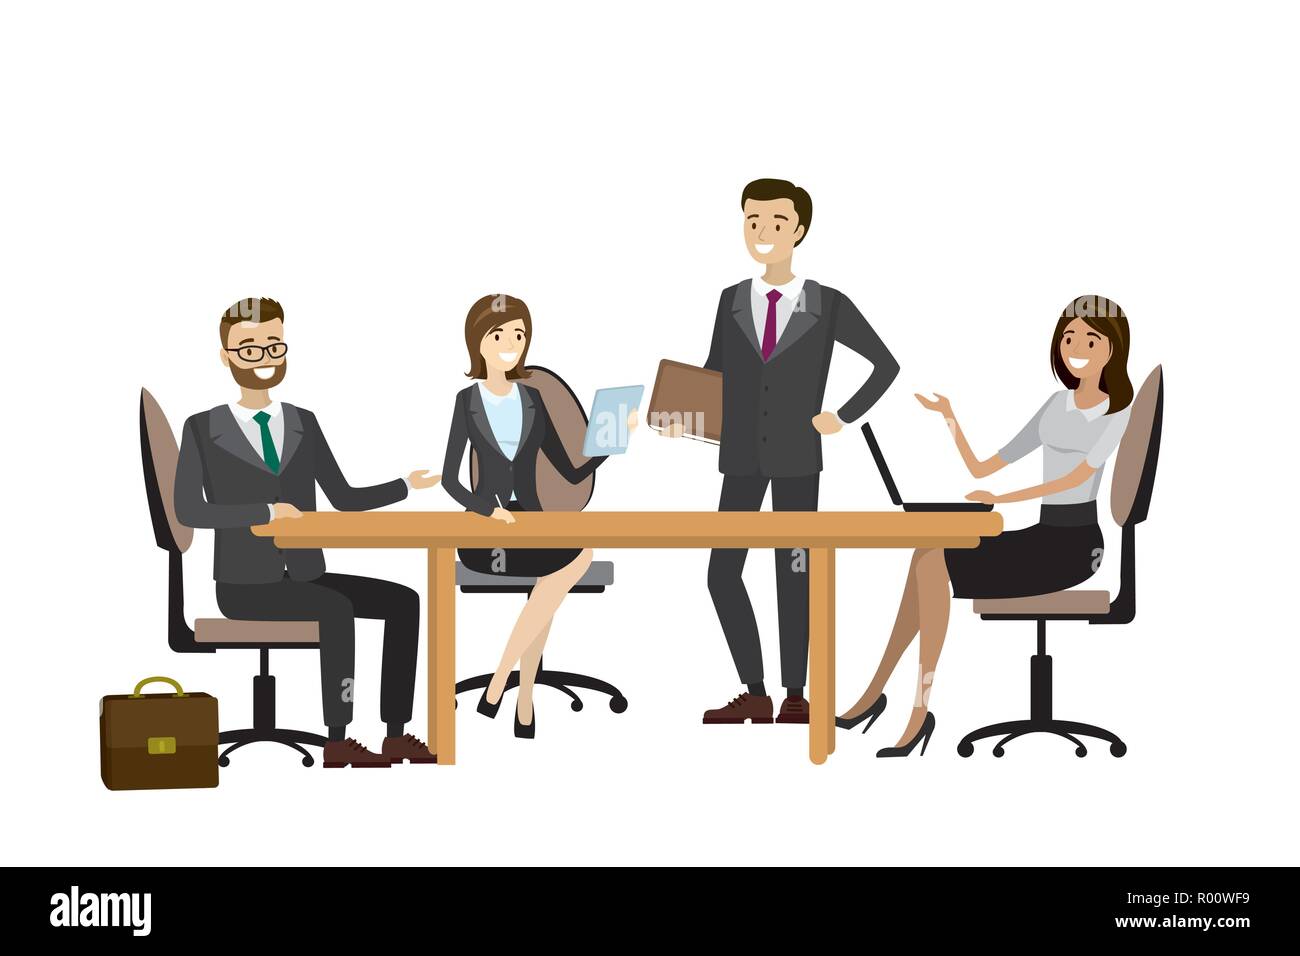 Group of working people, businessmen and businesswomen isolated on white background, business team brainstorming together,people characters.Cartoon ve Stock Vector